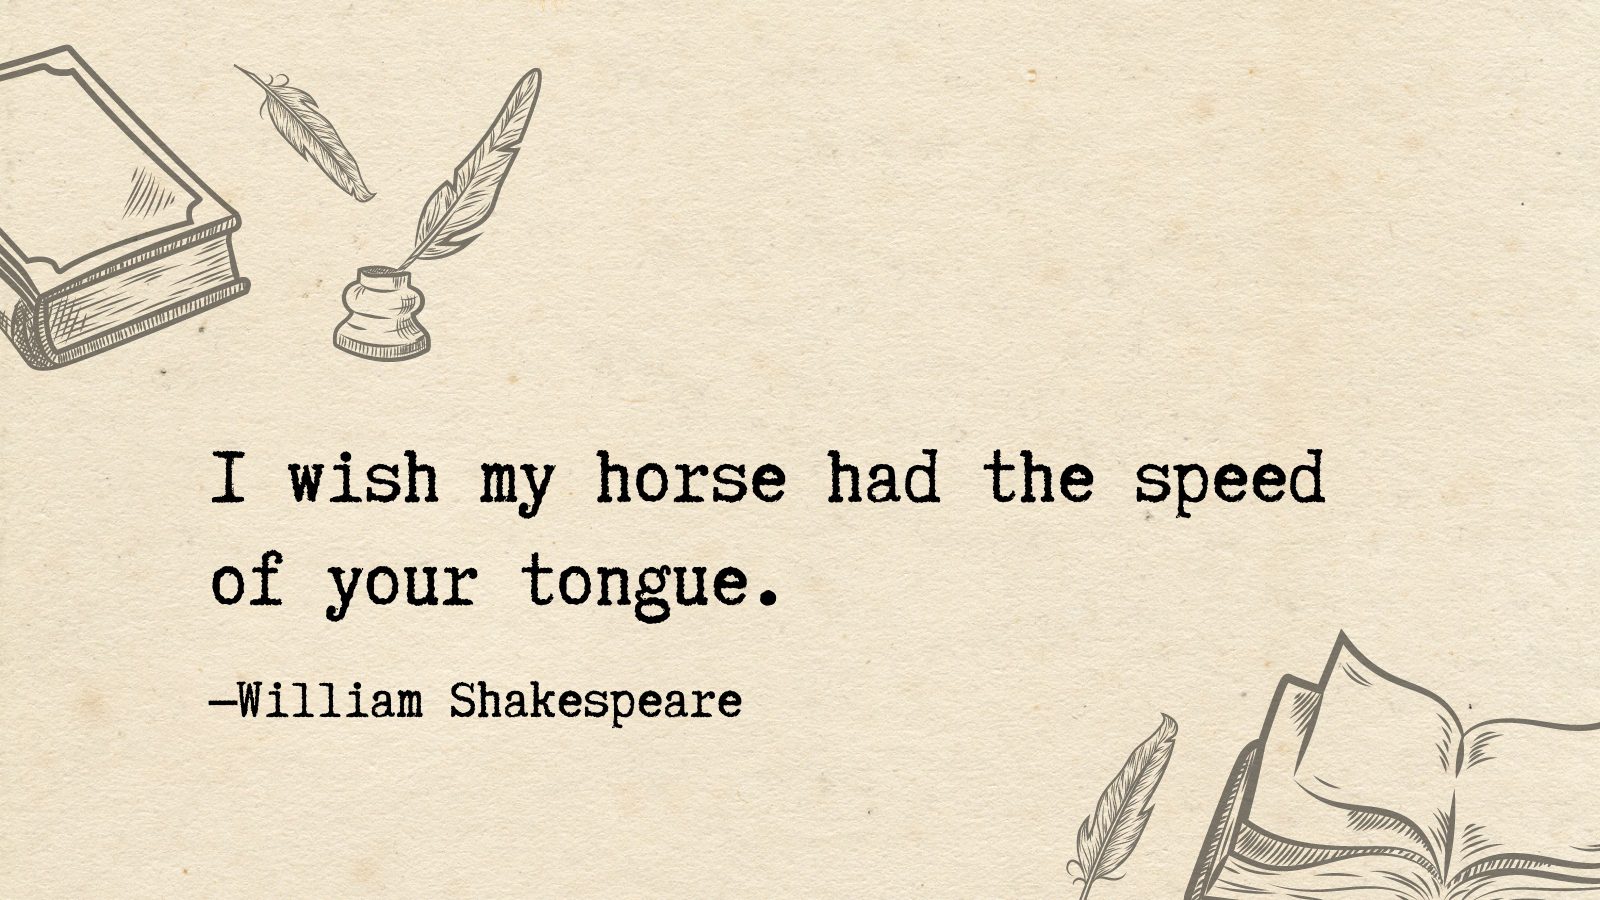 Shakespeare featured quote